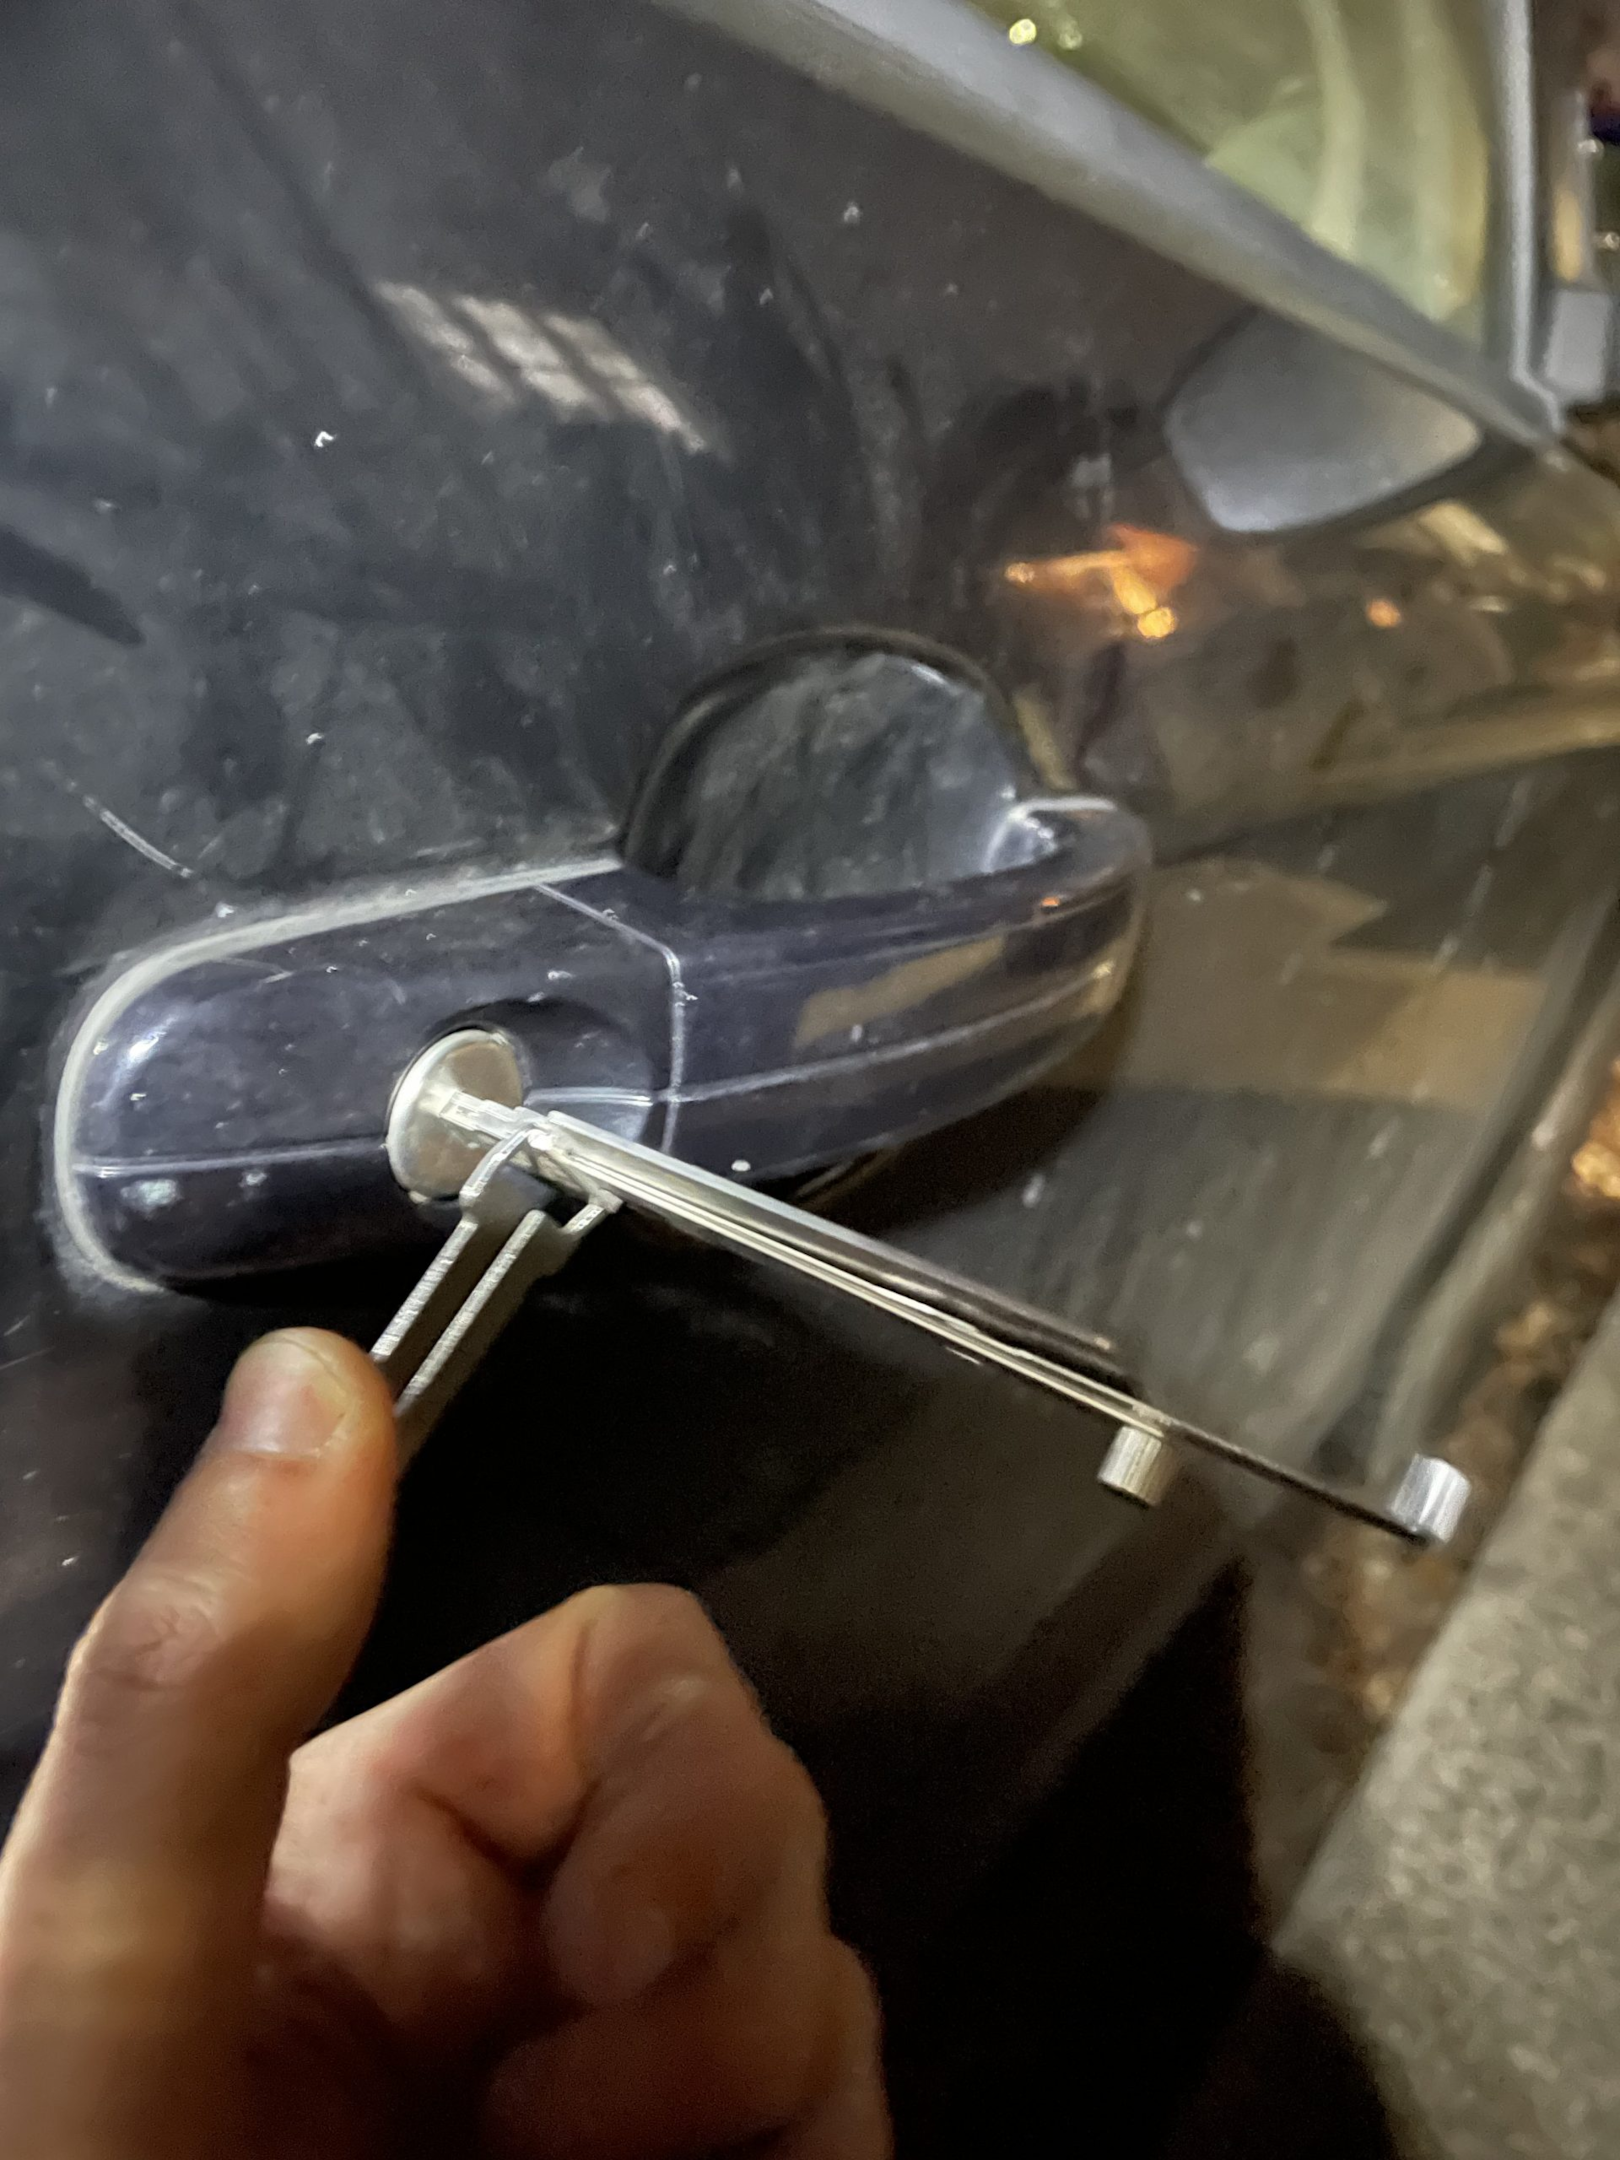 Find local car unlocking services when you've locked your keys in the vehicle.